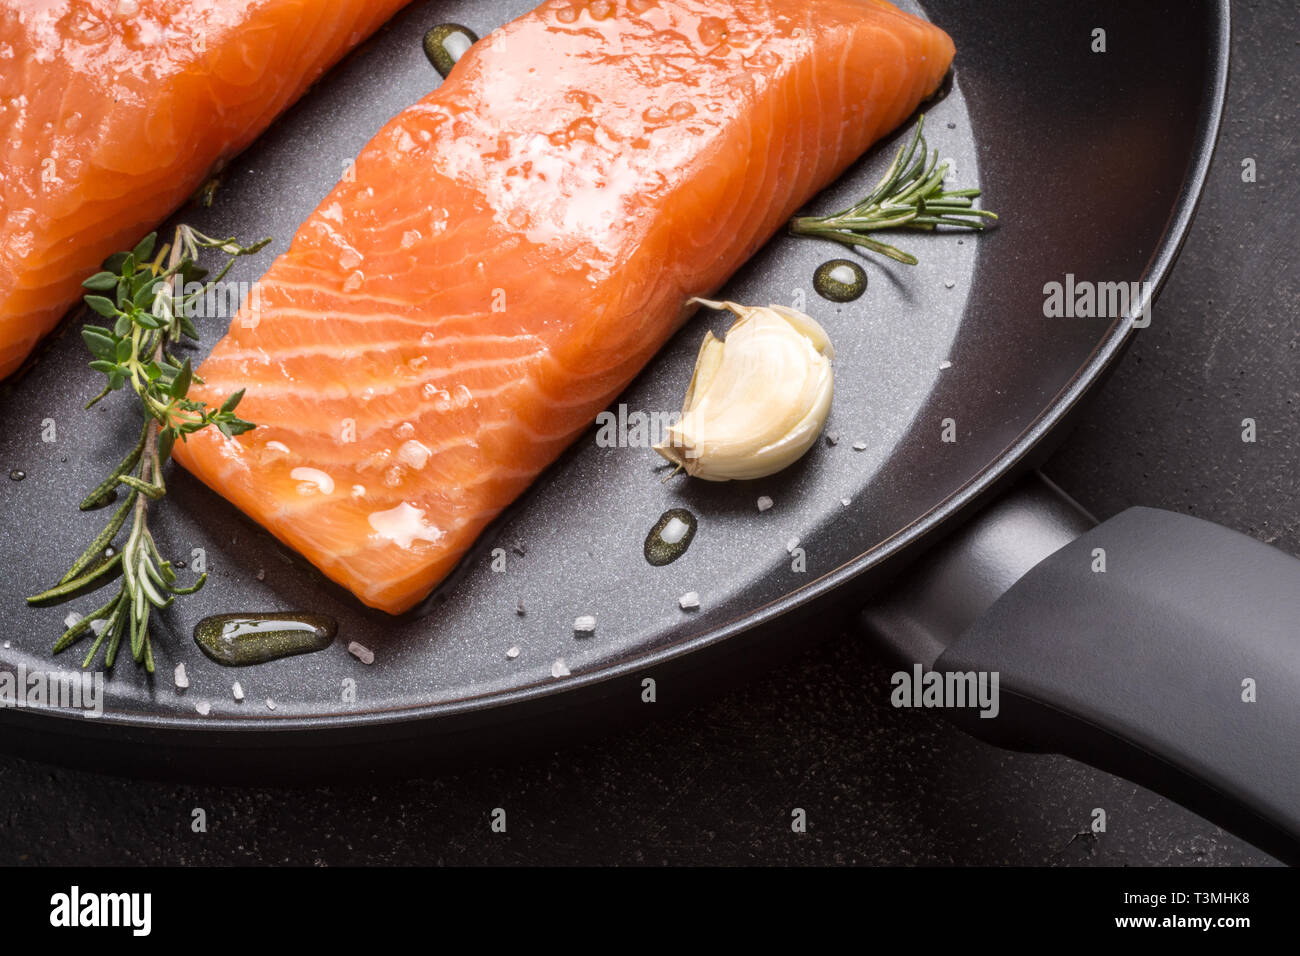 Salmon Steaks Fresh and Raw in Frying Pan with Thyme and Garlic Stock Photo